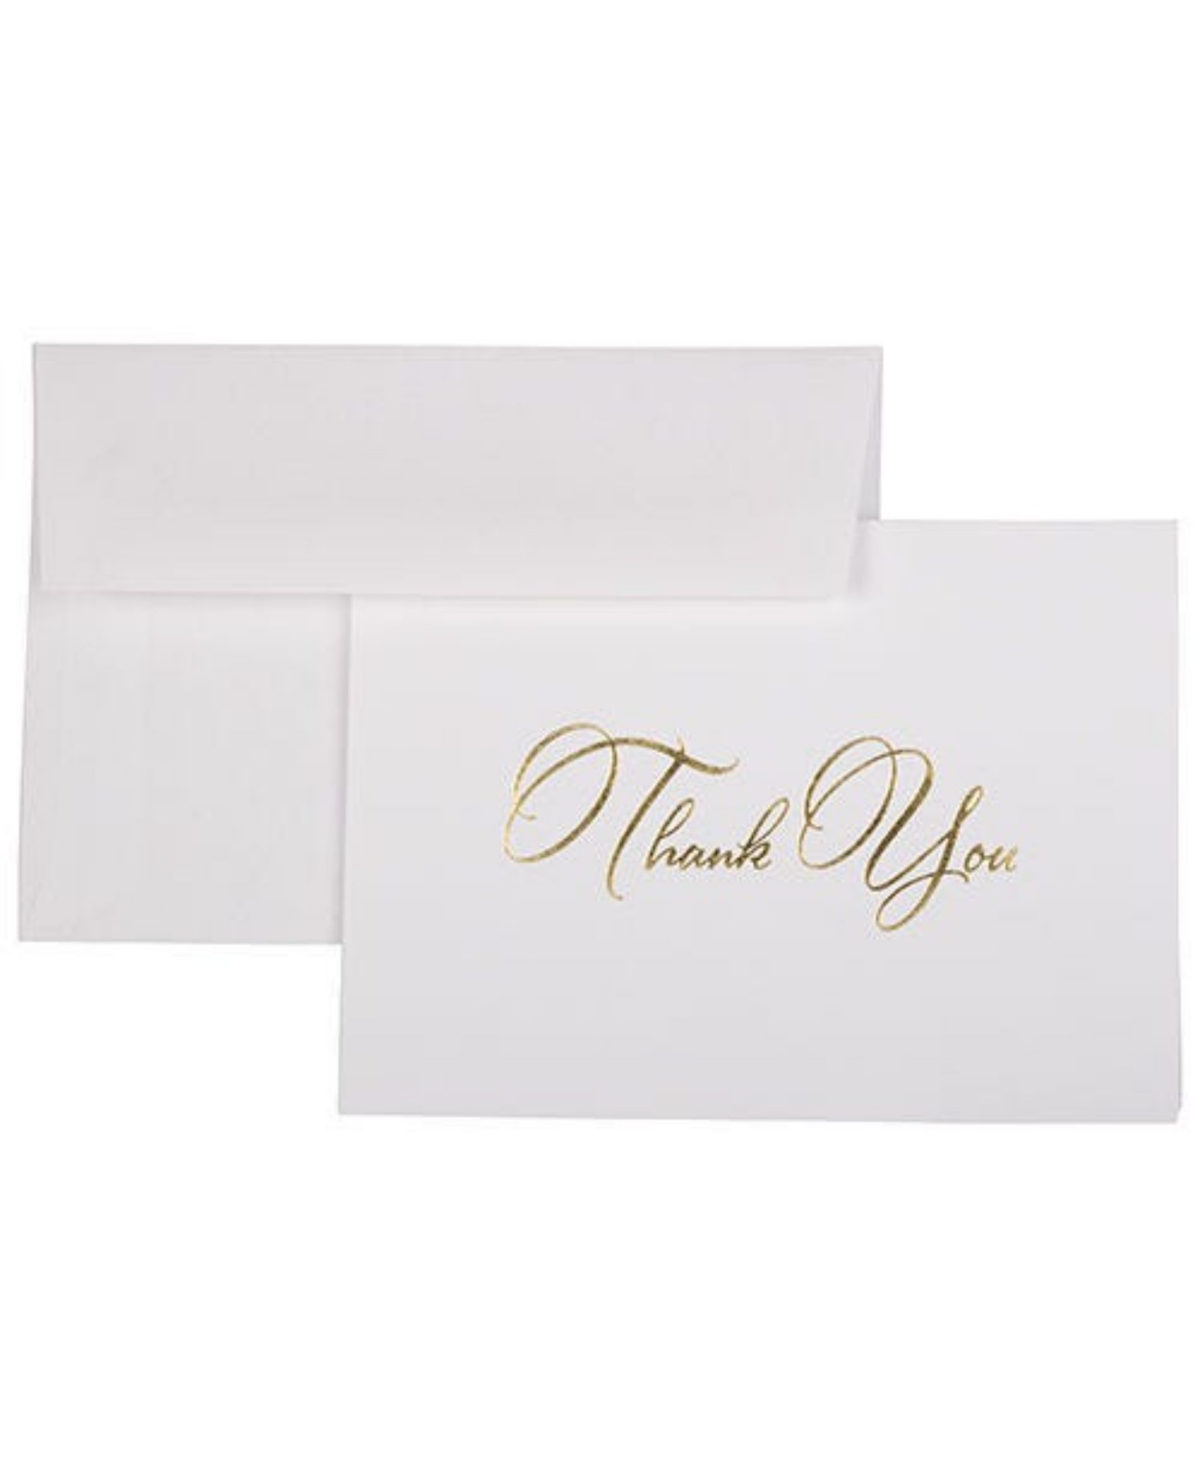 Blank Thank You Cards Set - Thank You Cards - Bright Cards with Script - 104 Cards 100 Matching Envelopes - White